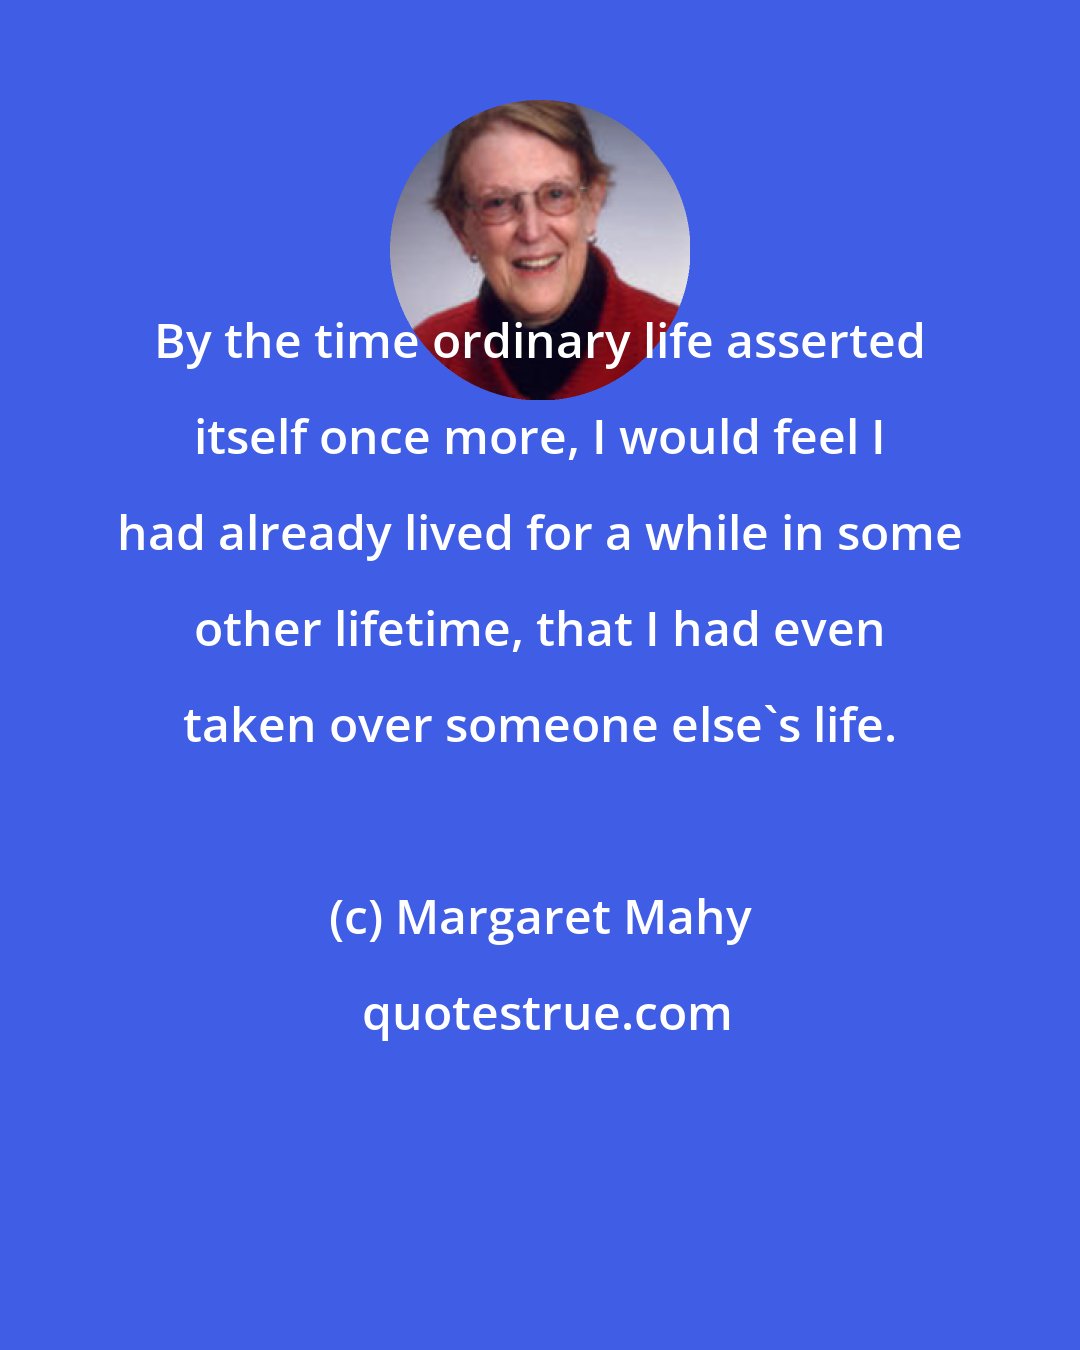 Margaret Mahy: By the time ordinary life asserted itself once more, I would feel I had already lived for a while in some other lifetime, that I had even taken over someone else's life.